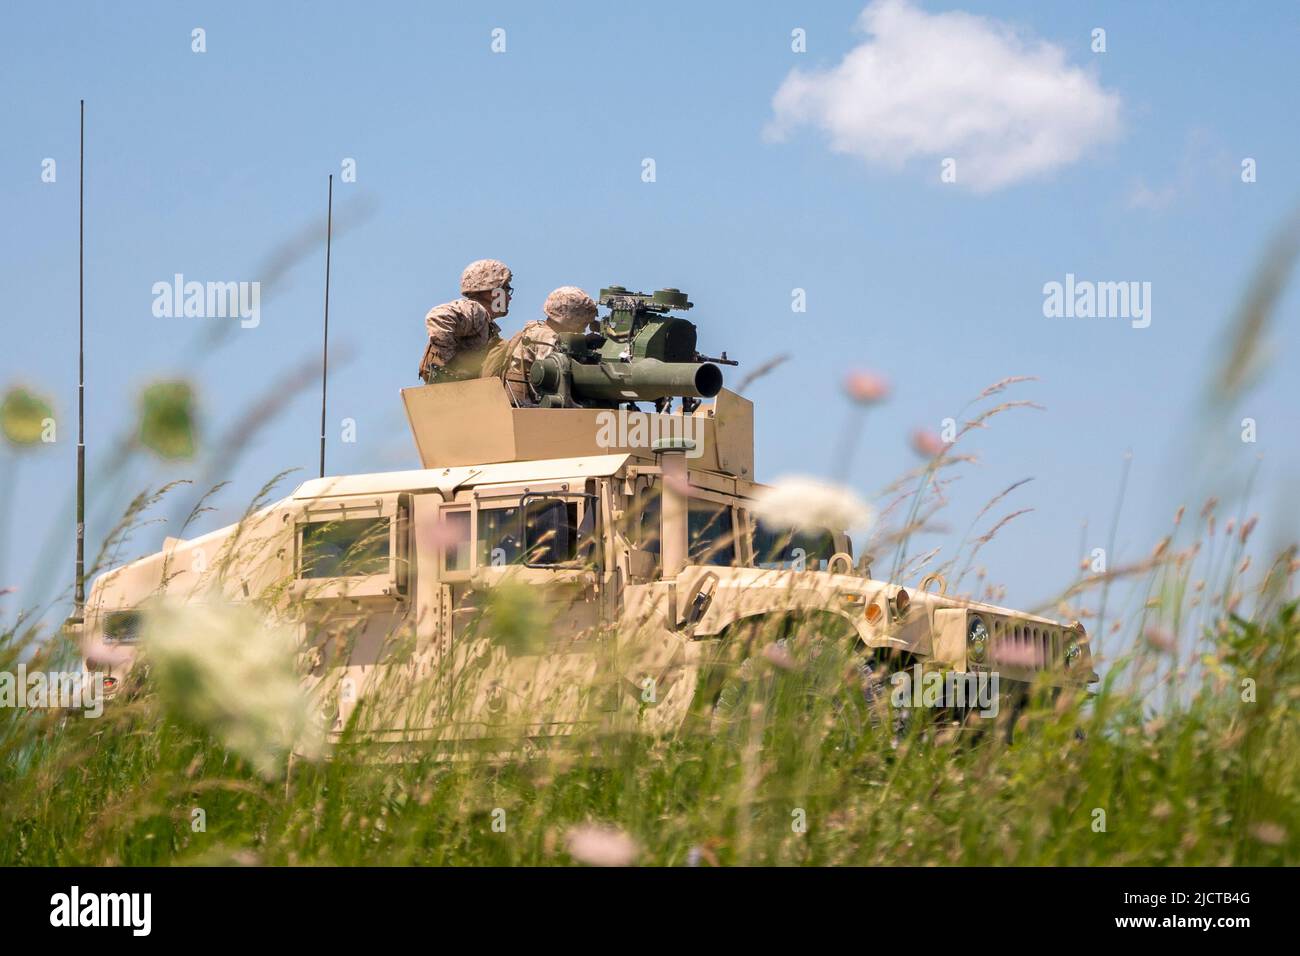 May 20, 2022 - Fort Campbell, Kentucky, USA - U.S. Reserve Marines assigned to the Combined Anti-Armor Team, Weapons Company, 3rd Battalion, 23rd Marine Regiment, 4th Marine Division, fire an Humvee-mounted M240B machine gun during a mission rehearsal exercise at Fort Campbell, Kentucky, May 19, 2022. Weapons Company convened with other units from 3/23 at Fort Campbell for a mission rehearsal exercise to prepare for the upcoming Integrated Training Exercise 4-22 in the summer of 2022. The Combined Anti-Armor Team Marines conducted machine gun ranges and convoy operations with quick reaction dr Stock Photo